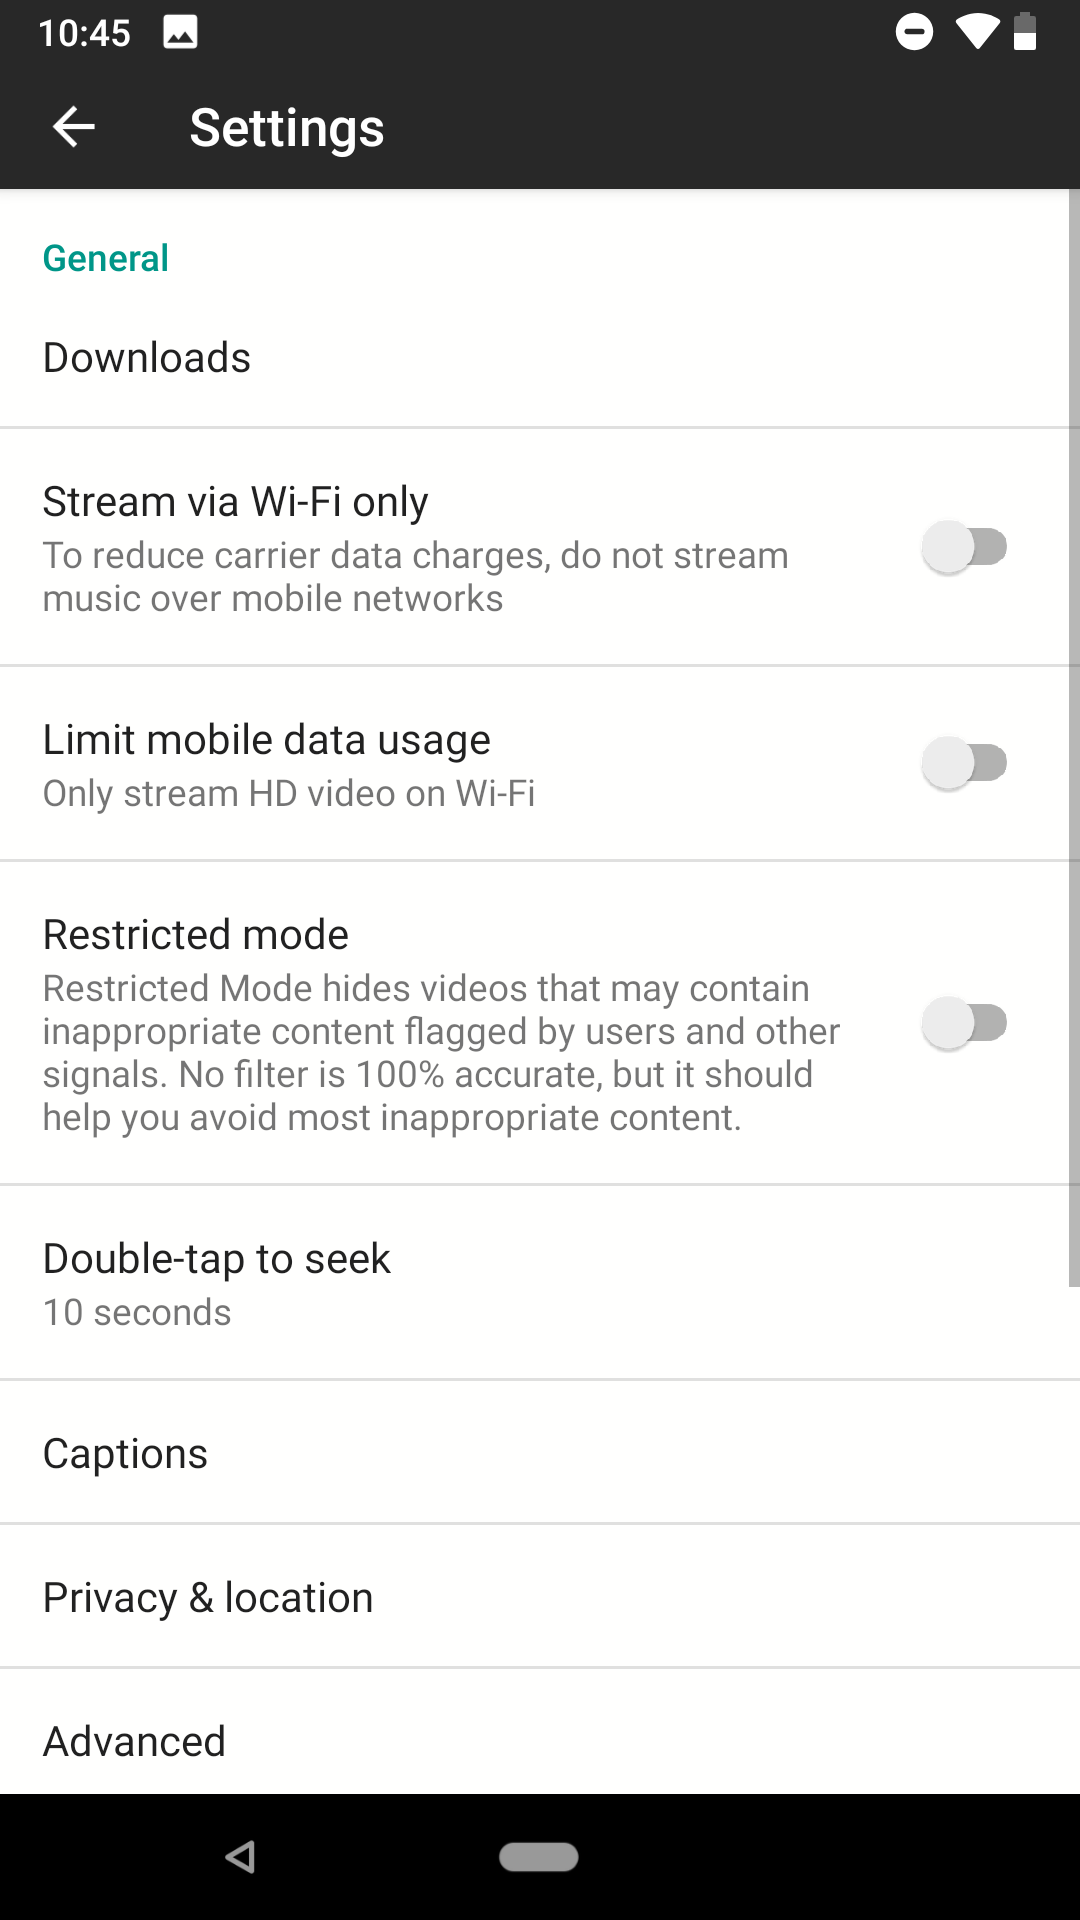 How To Download Music In Youtube Music For Offline Playback